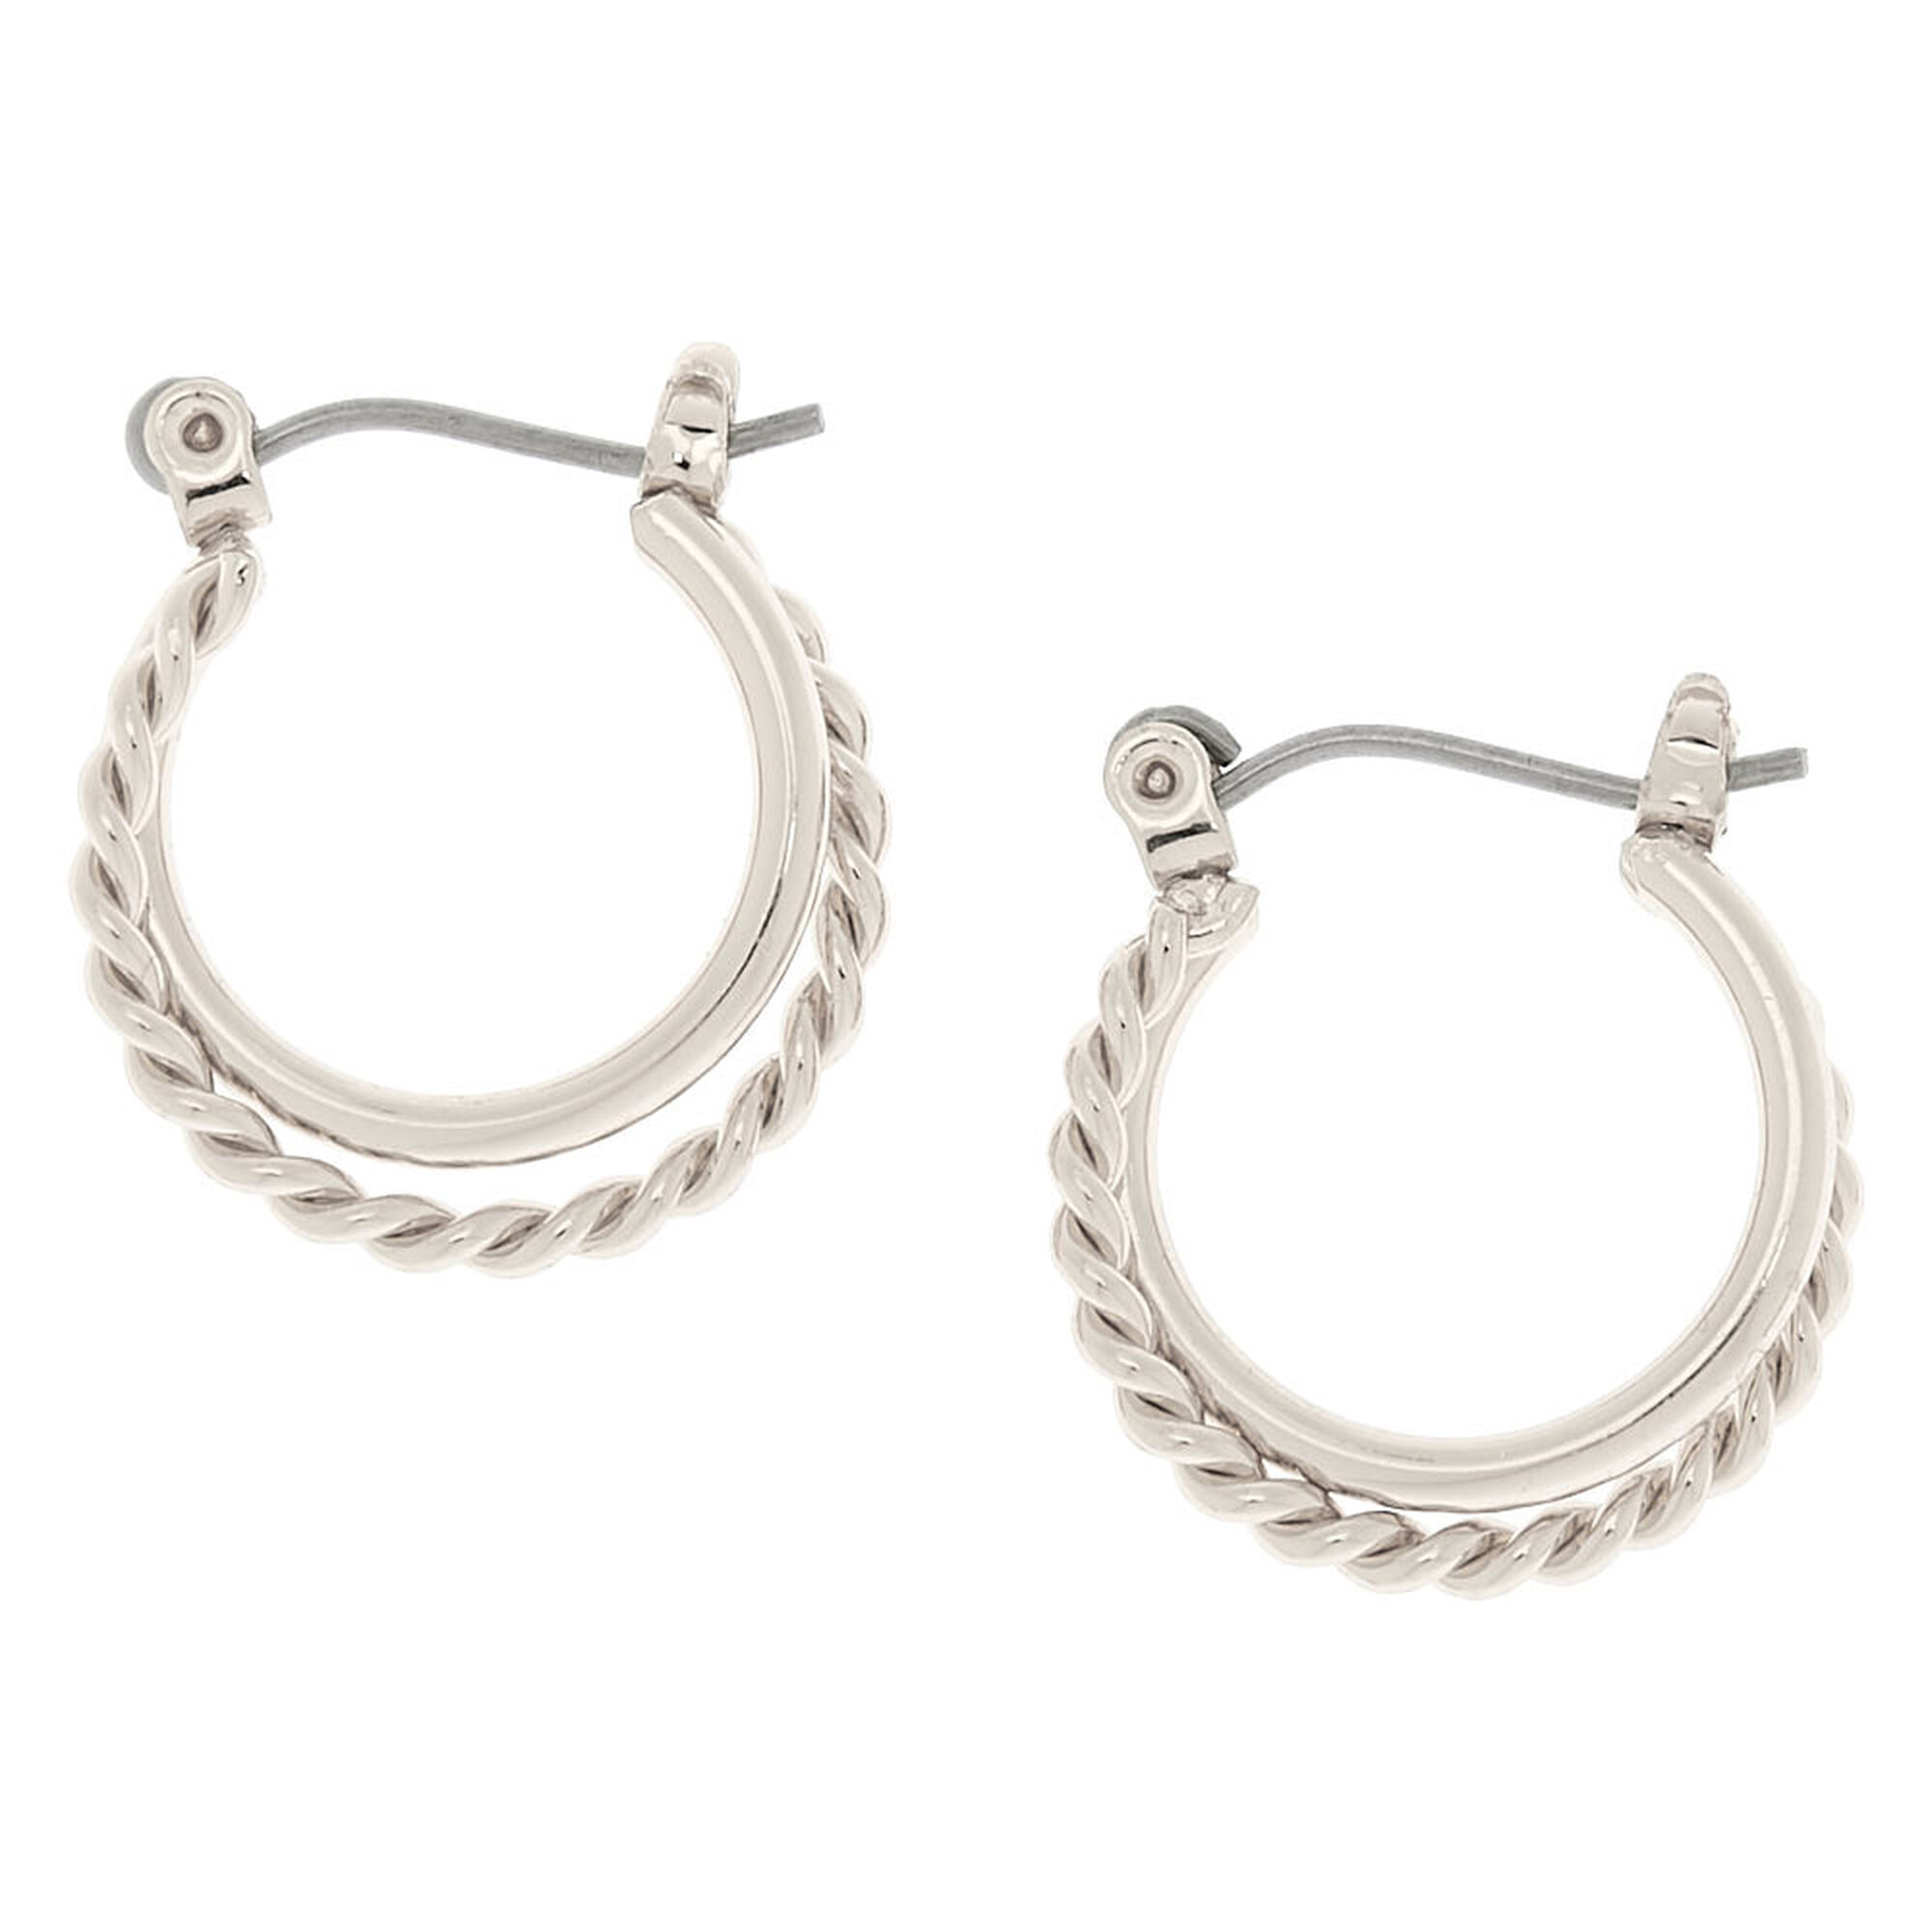 View Claires Tone 15MM Braided Double Hoop Earrings Silver information